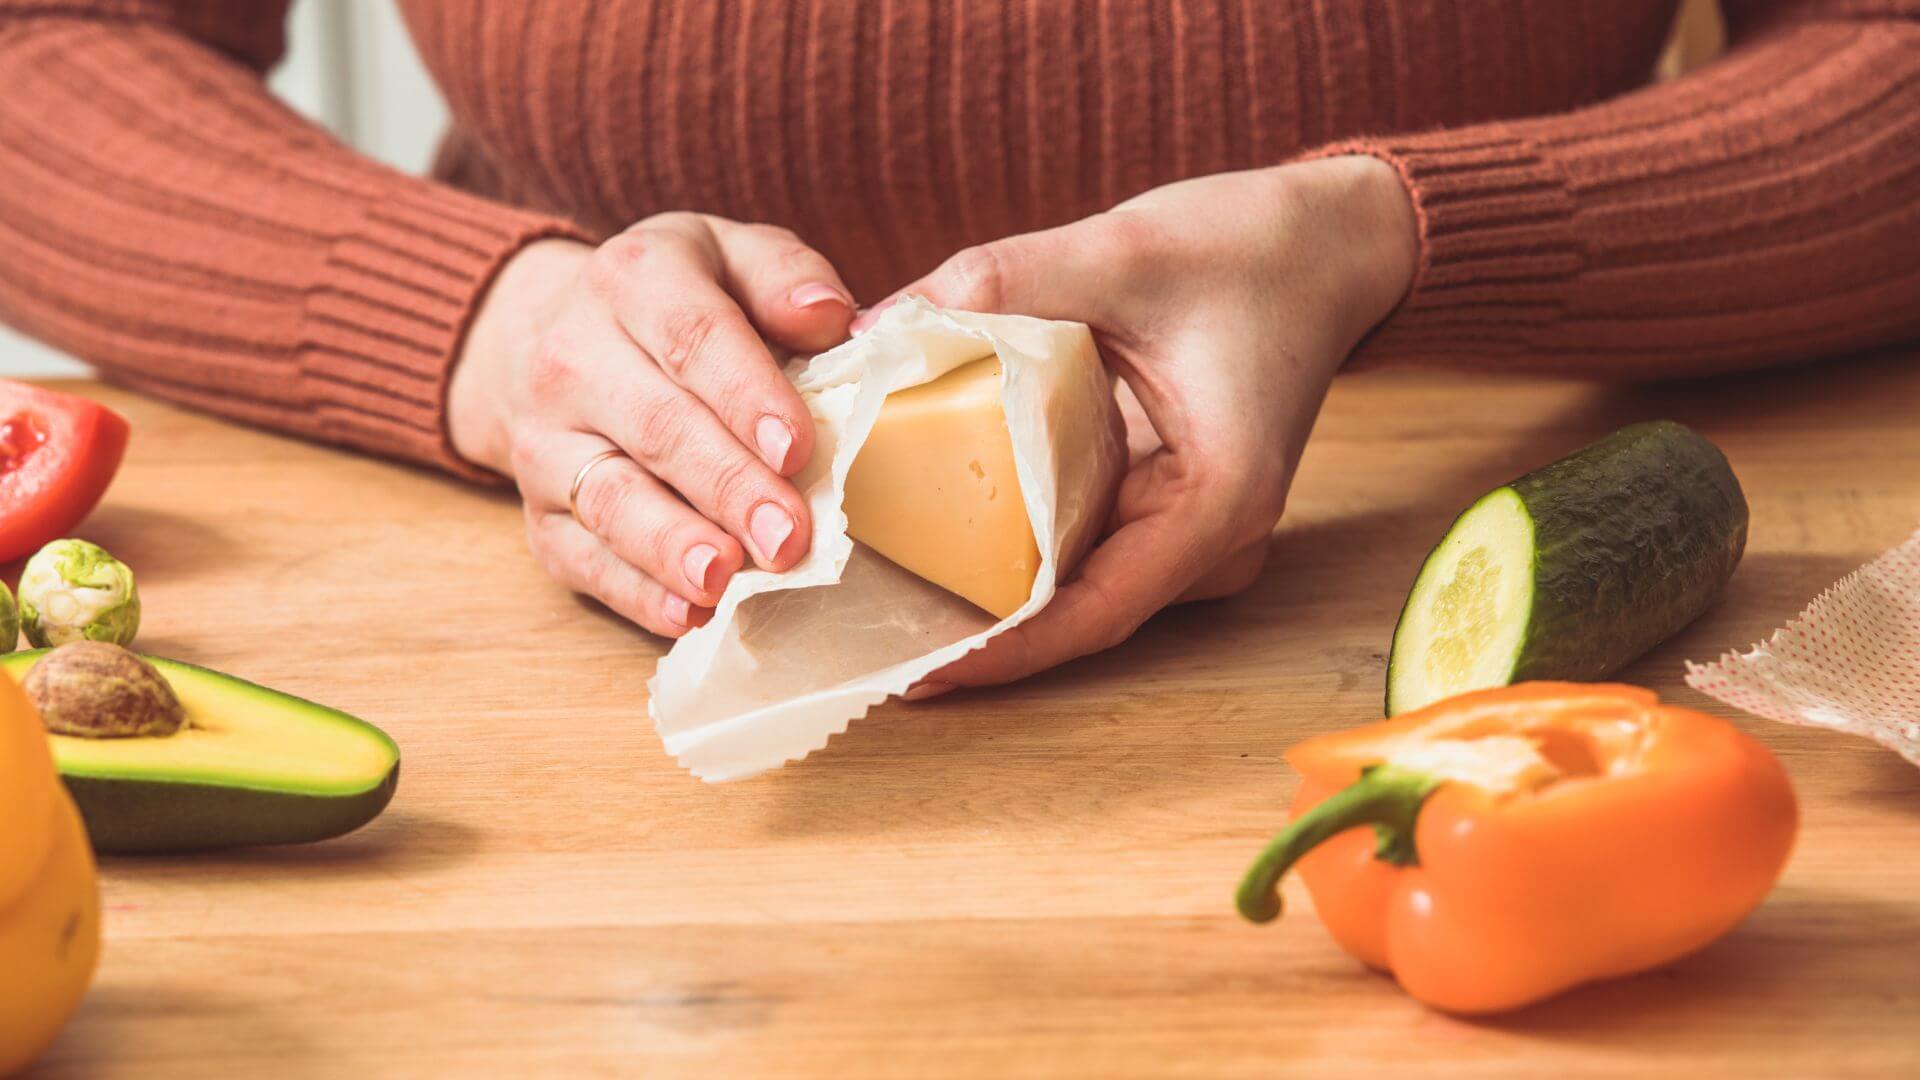 Collombatti Naturals Beeswax Wraps FAQ picture of someone wrapping some hard cheese in a beeswax wrap